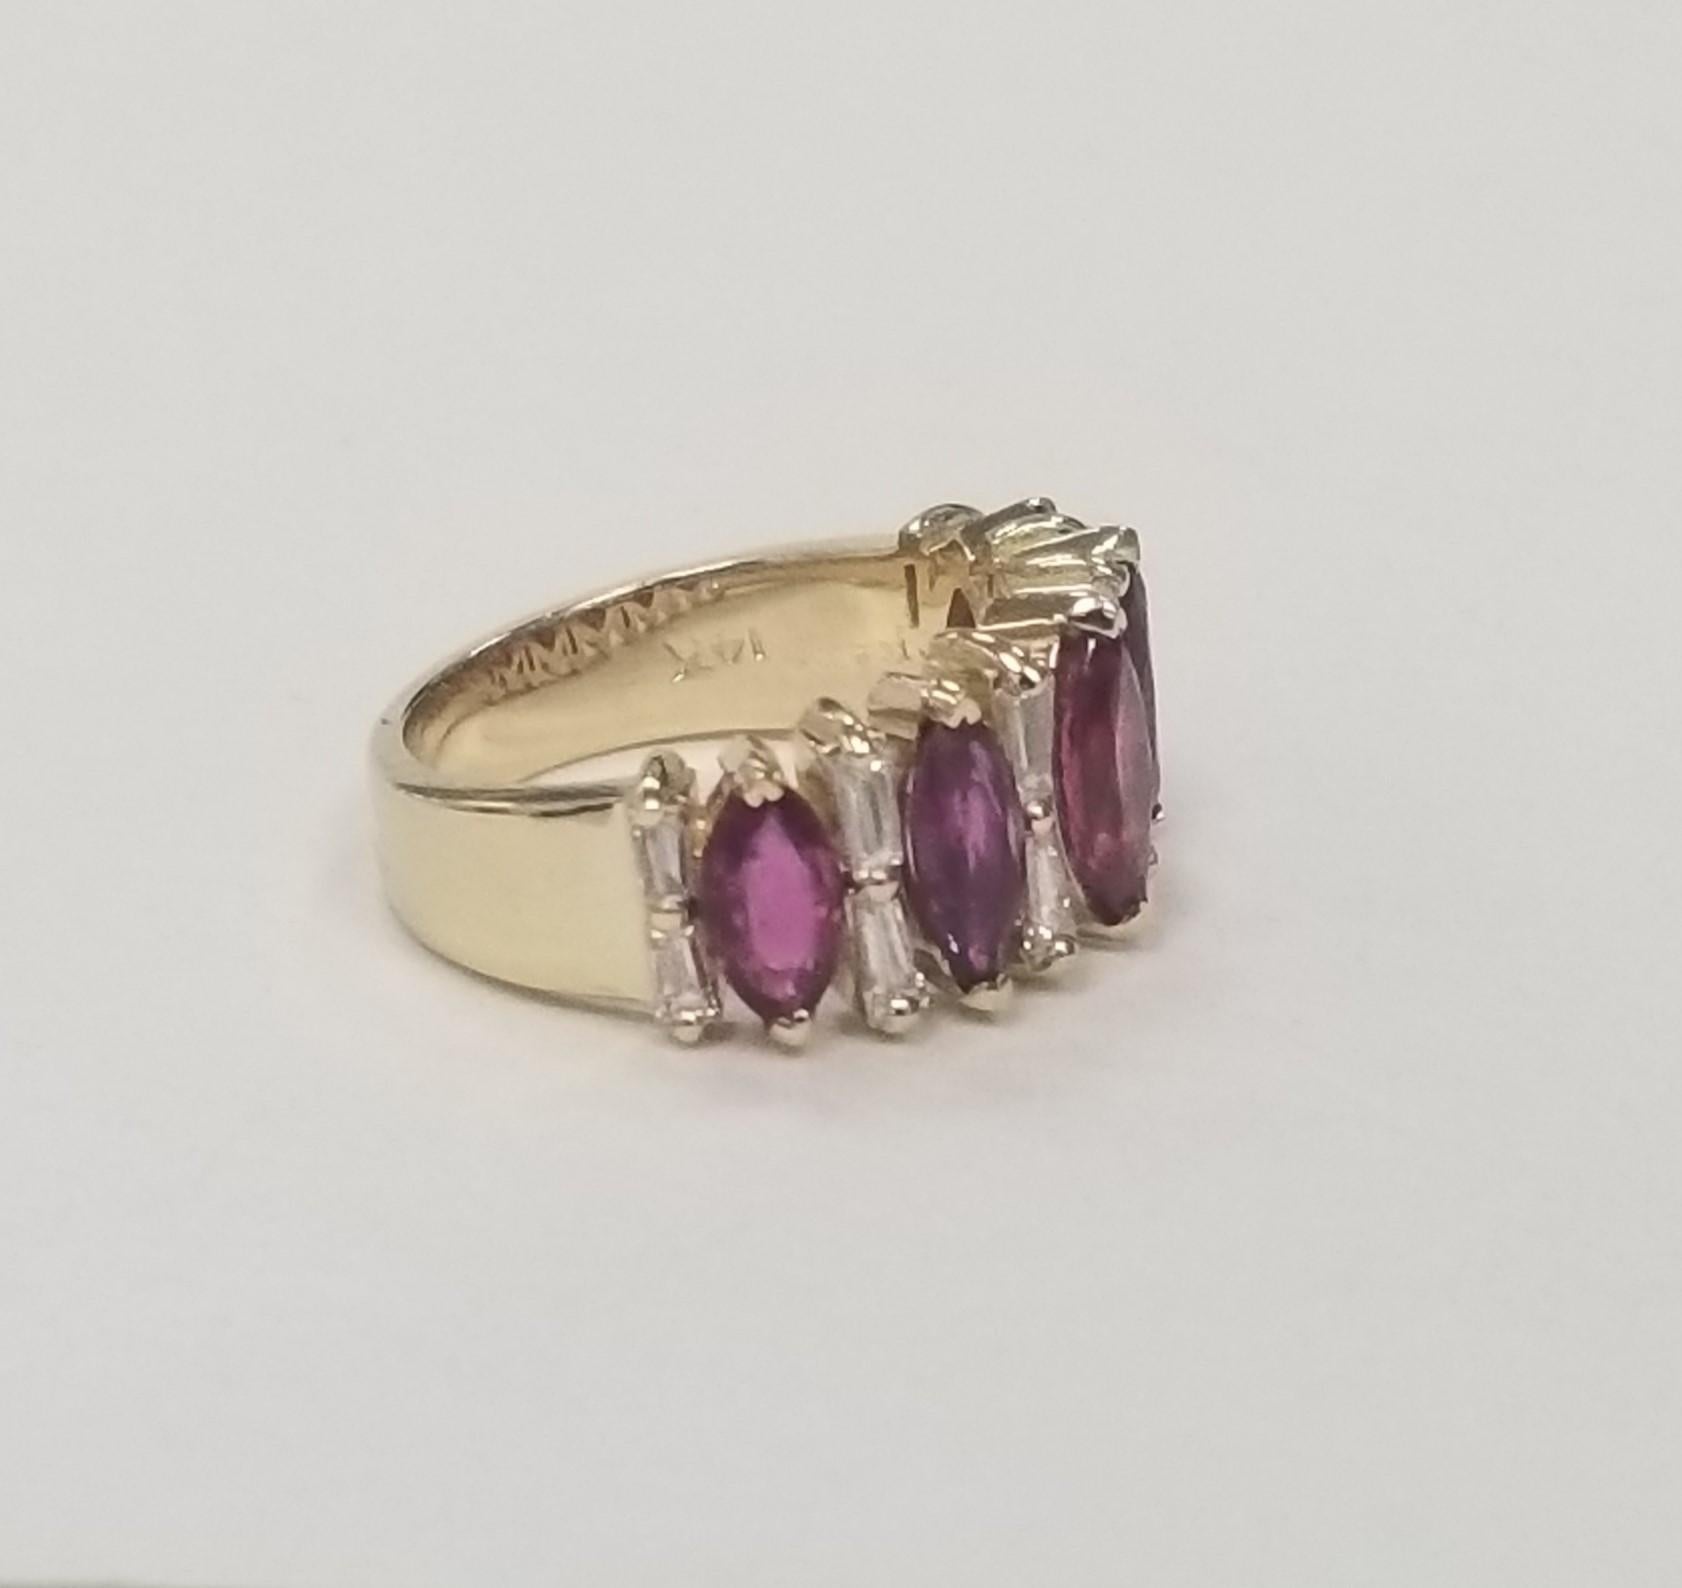 Vintage 14k Yellow gold Marquise Ruby and Baguette Cut Diamond Wedding Ring . 
Specifications:
Metal: 14K White Gold
Center Stone: 5 Marquise Cut Rubies 3.30 cts.
Side Stones: 12 Baguette Diamonds .70 cts.
Color: G
Clarity: VS
Size: 6.5US
Gram